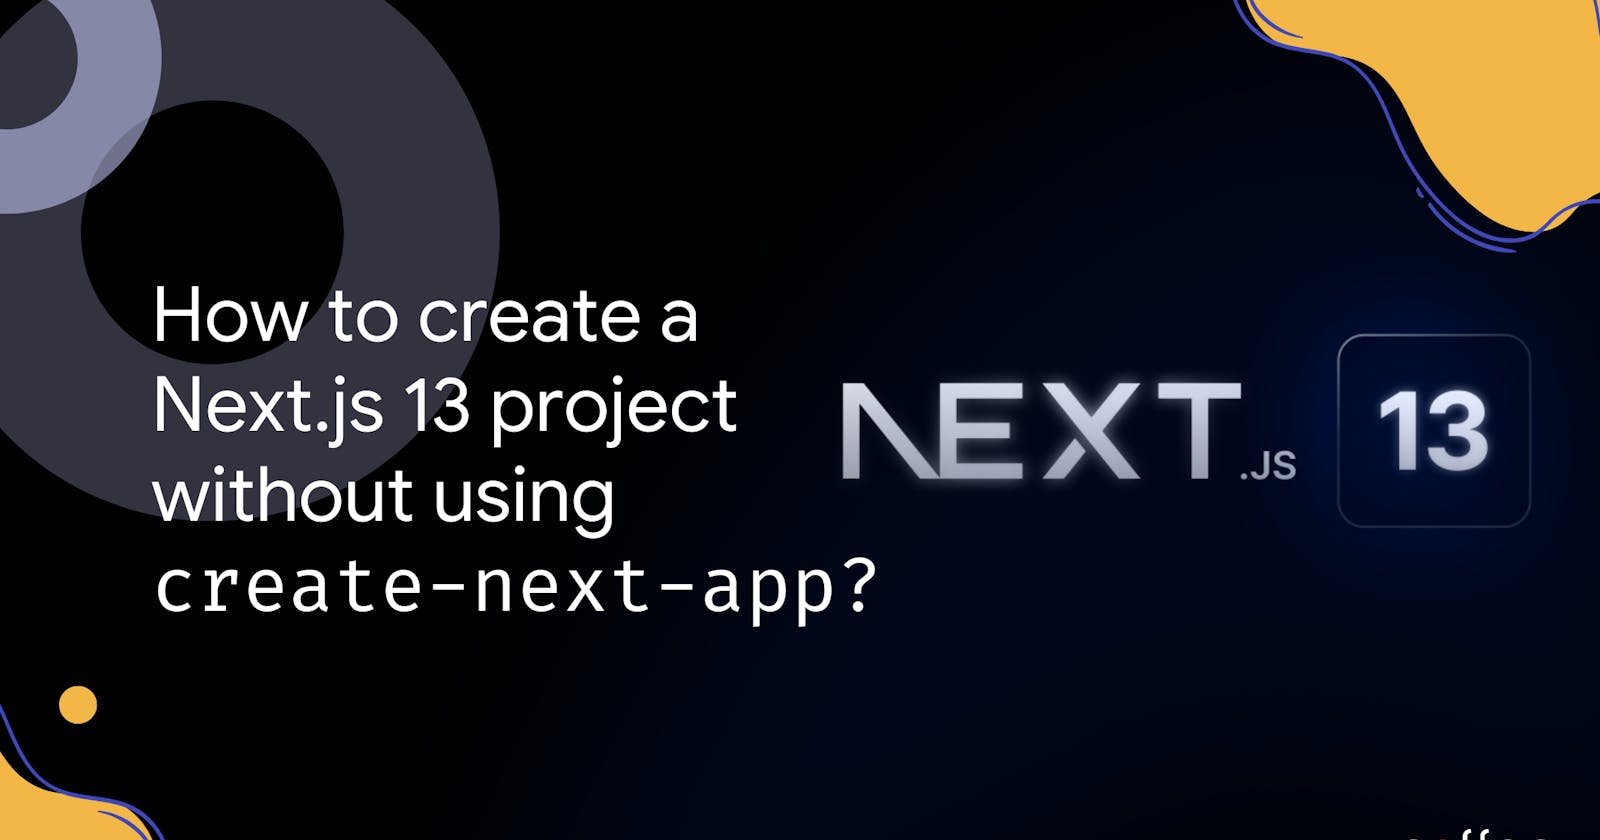 Getting Started with Next.js 13 from scratch